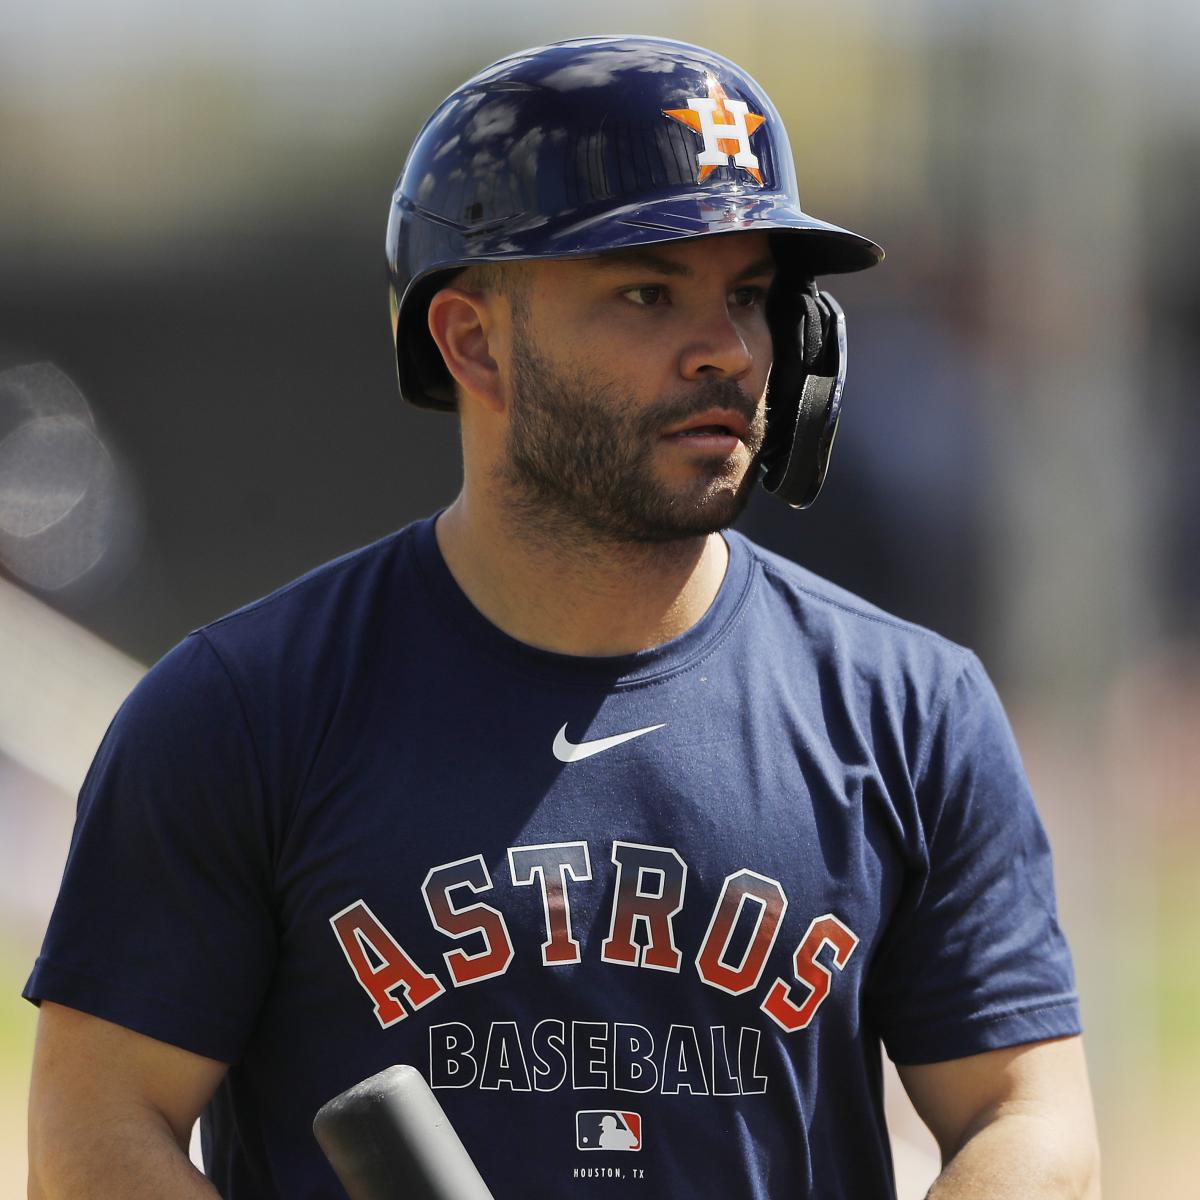 Jose Altuve was booed heartily by fans in first spring training game